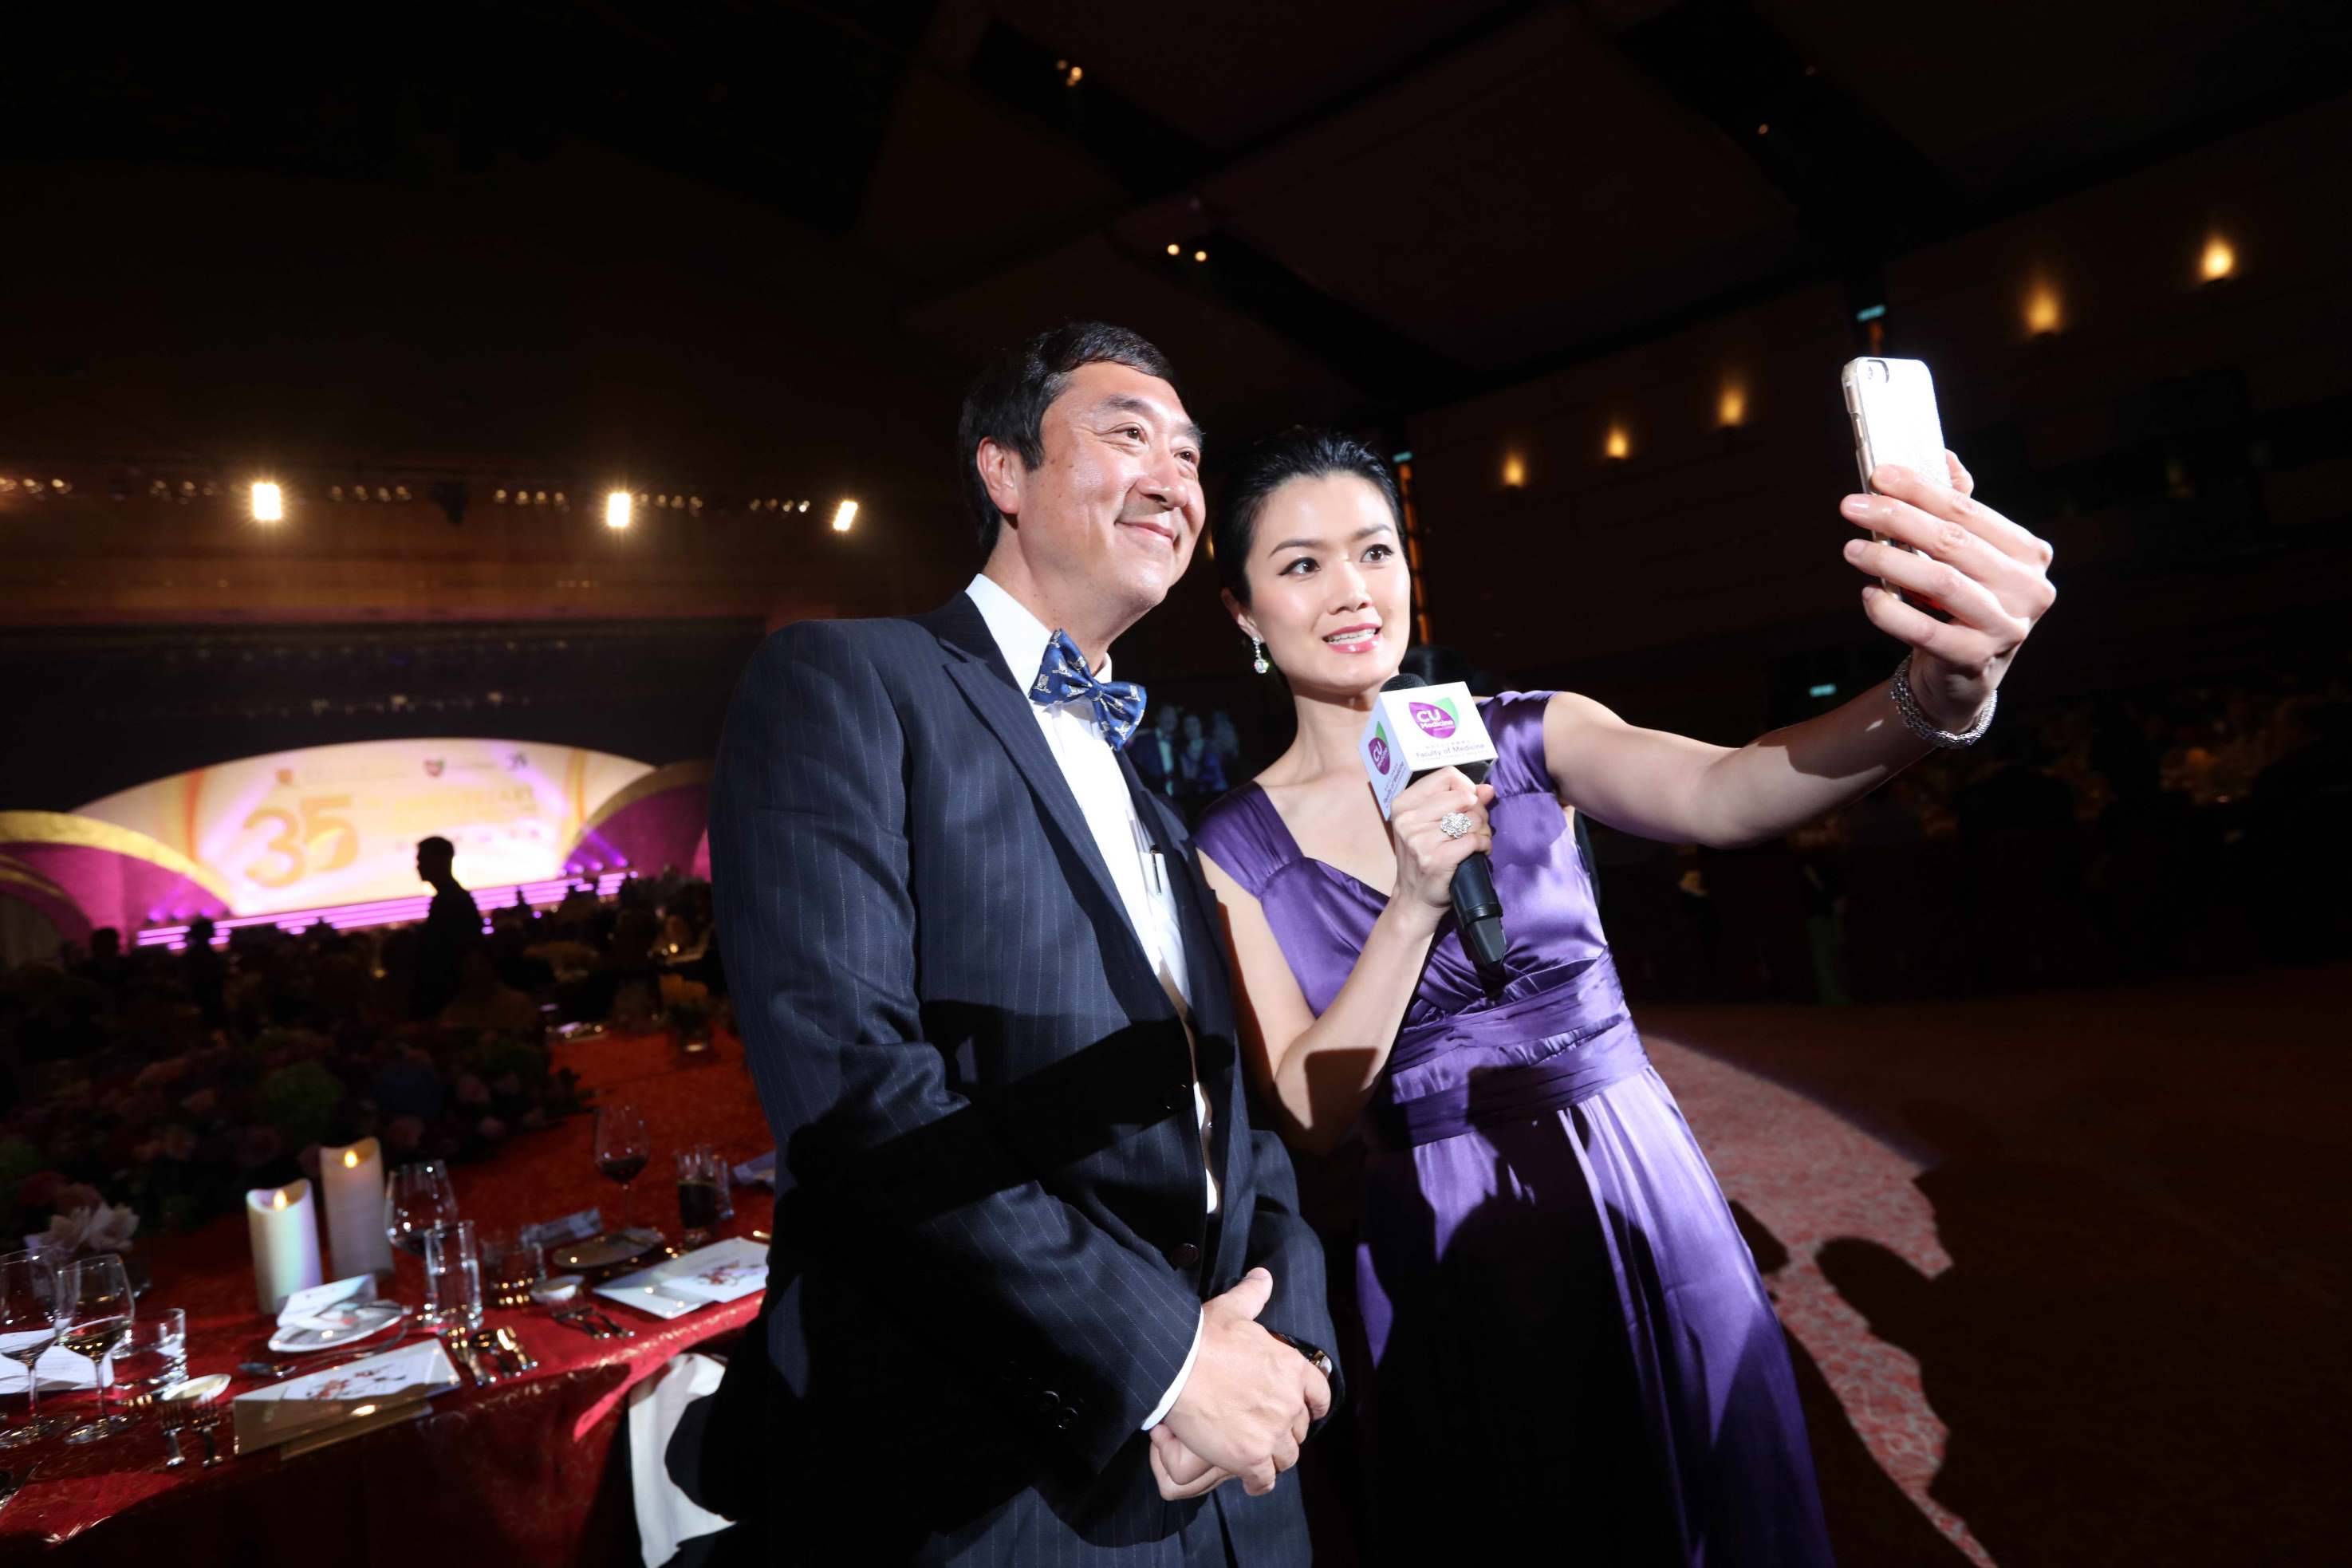 Vice-Chancellor Prof. Joseph SUNG and host of dinner Ms. Akina FONG take a mobile selfie.